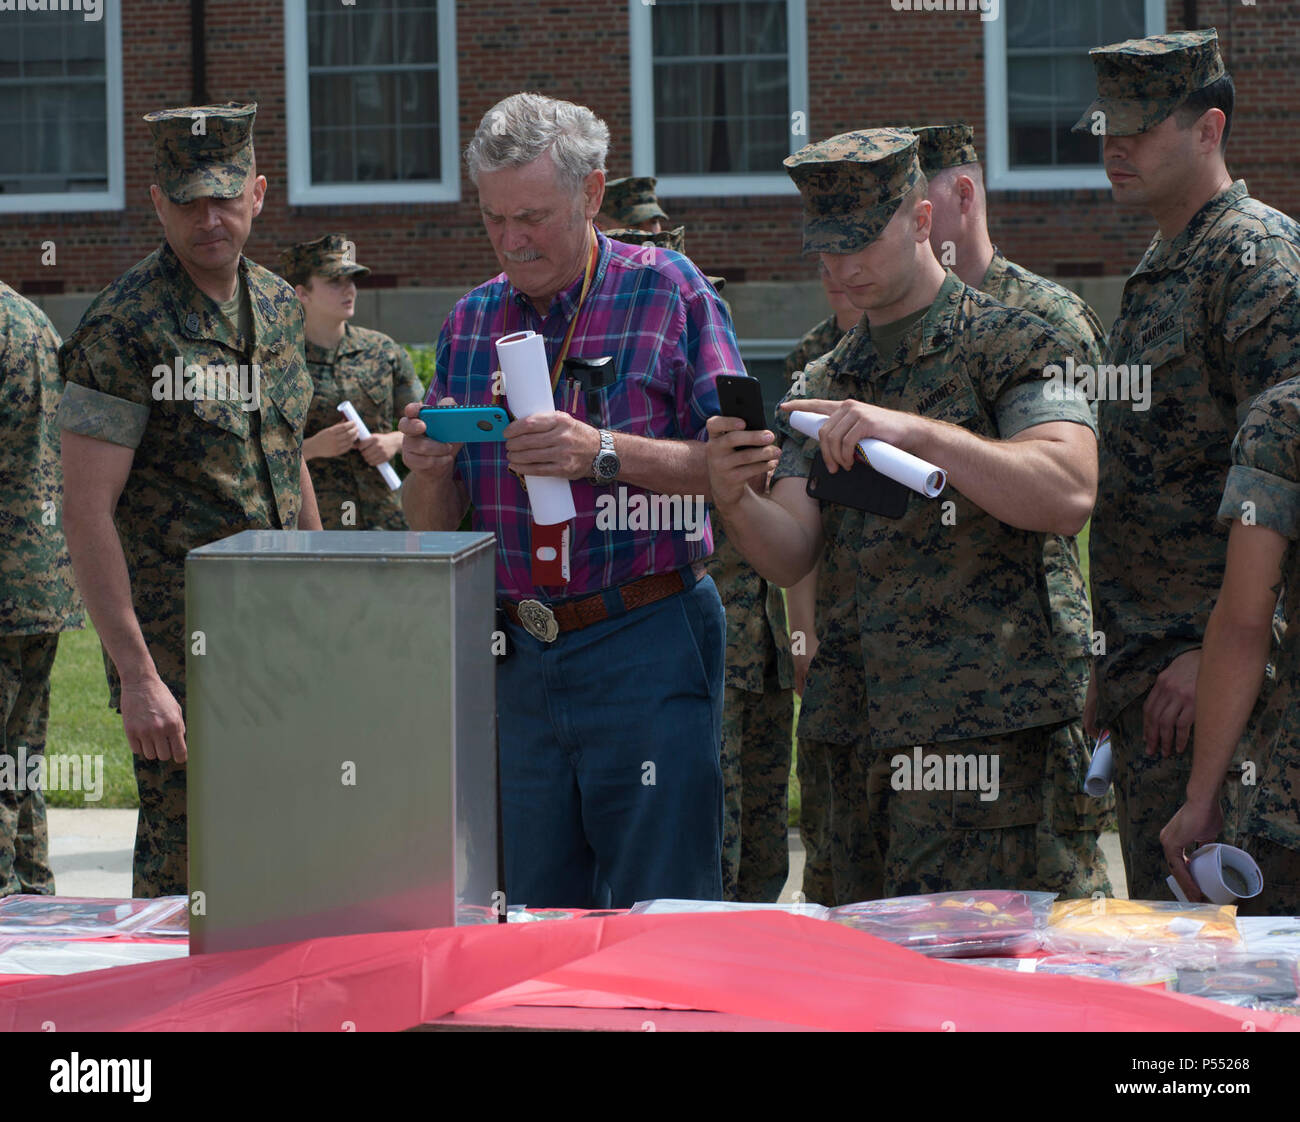 Attendees of the Centennial Celebration Ceremony look at the items that will be placed in a time capsule later this year, at Lejeune Field, Marine Corps Base Quantico (MCBQ), Va., May 10, 2017. The event commemorates the founding of MCBQ in 1917, and consisted of performances by the U.S. Marine Corps Silent Drill Platoon and the U.S. Marine Drum & Bugle Corps. Stock Photo